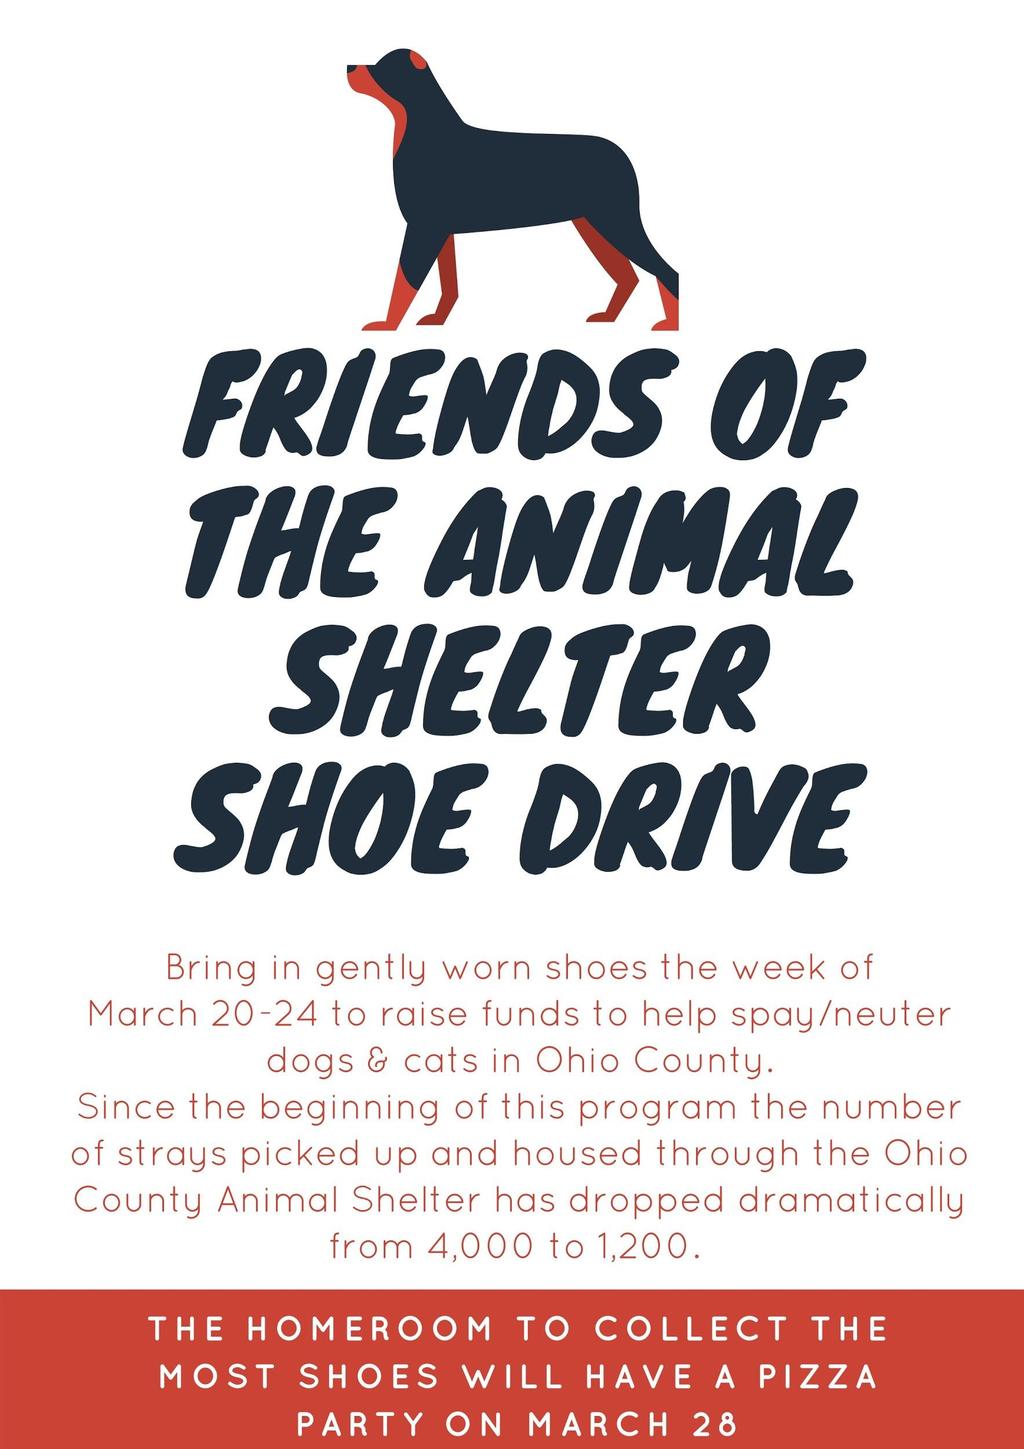 Animal Shelter Shoe Drive We have had a Friends of the Animal Shelter Shoe Drive at OCMS this week.